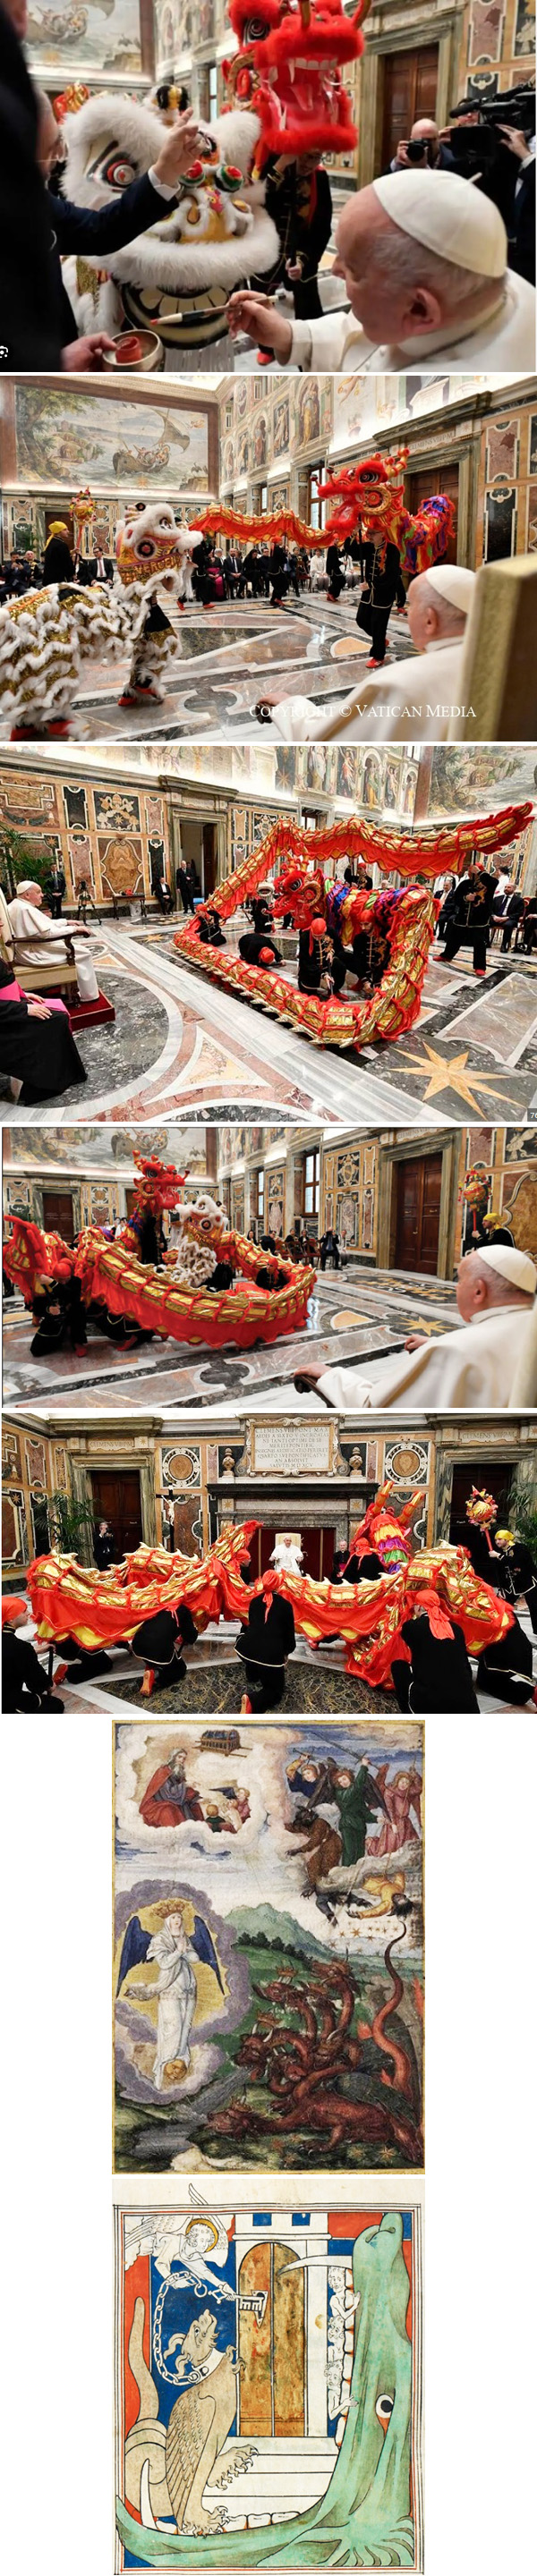 Pope with dragon 2